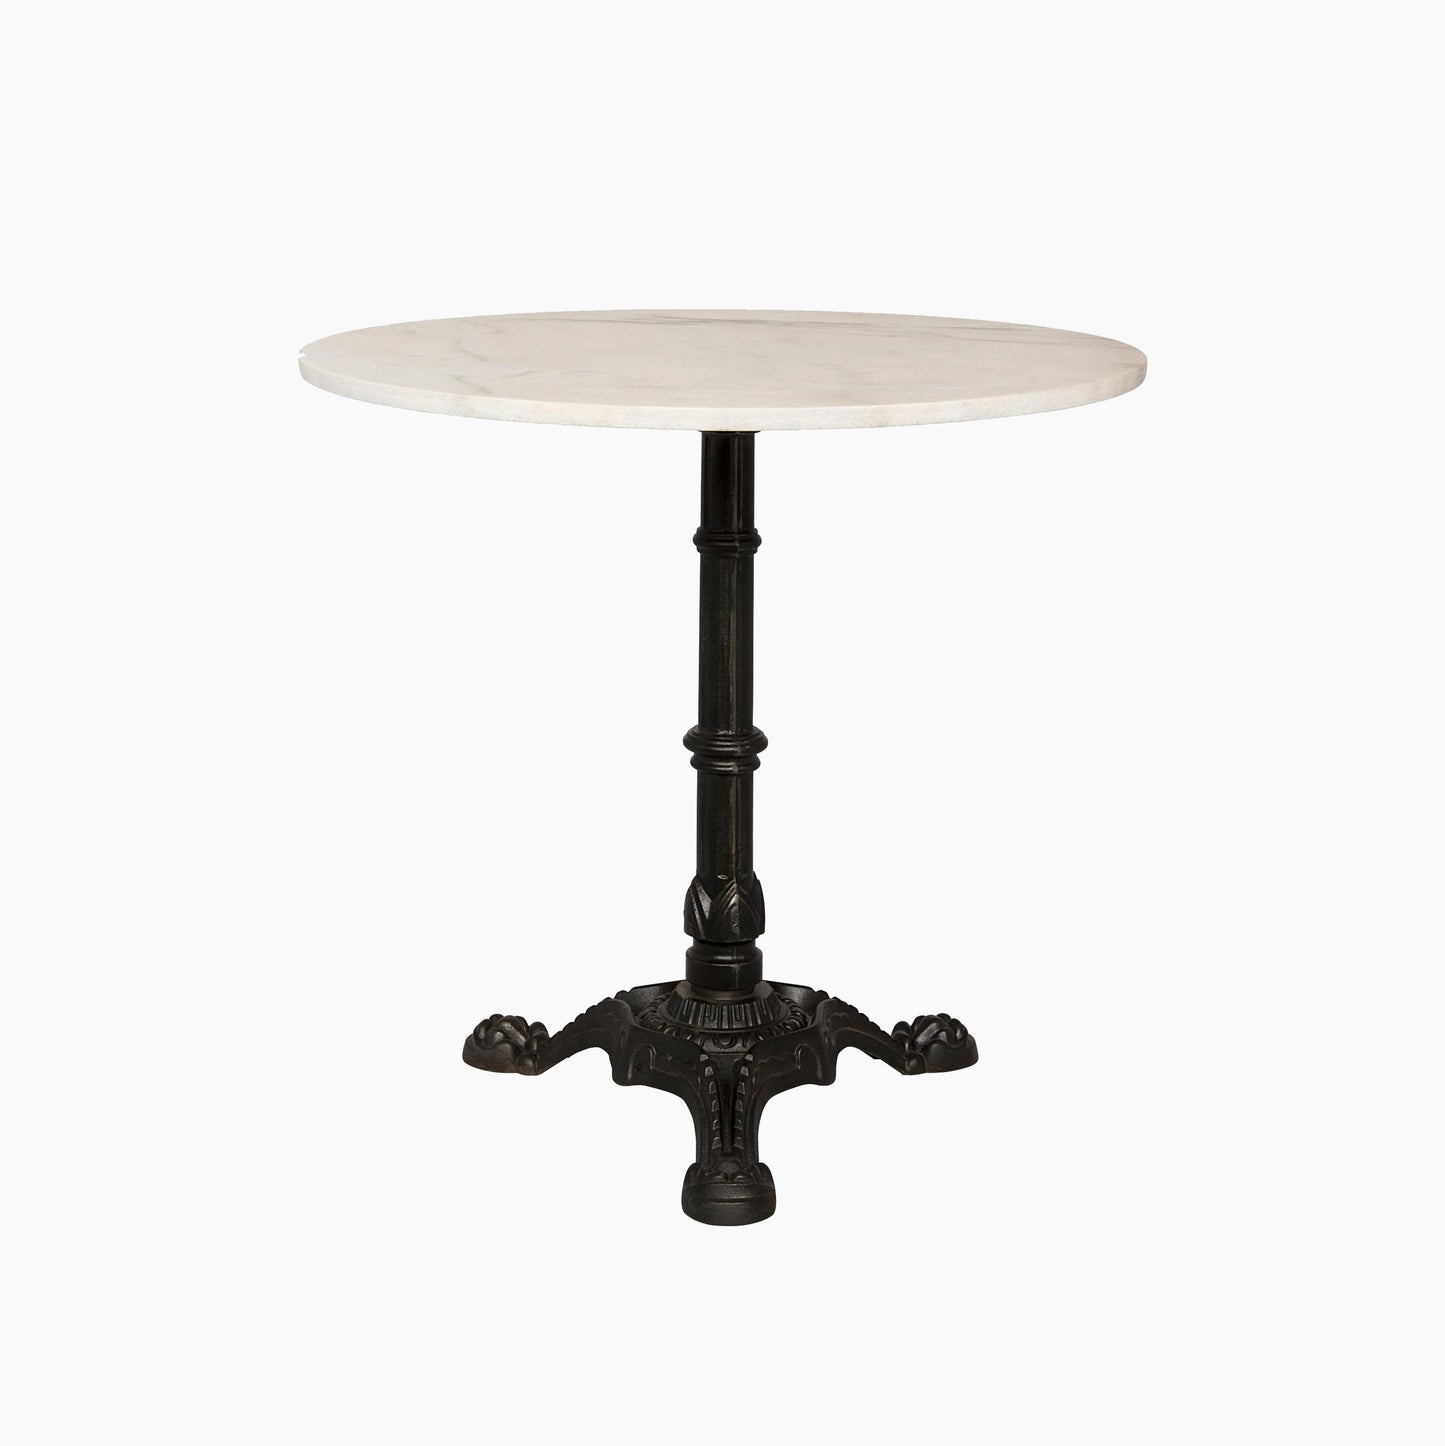 Norah Side Table, Black Metal with White Stone